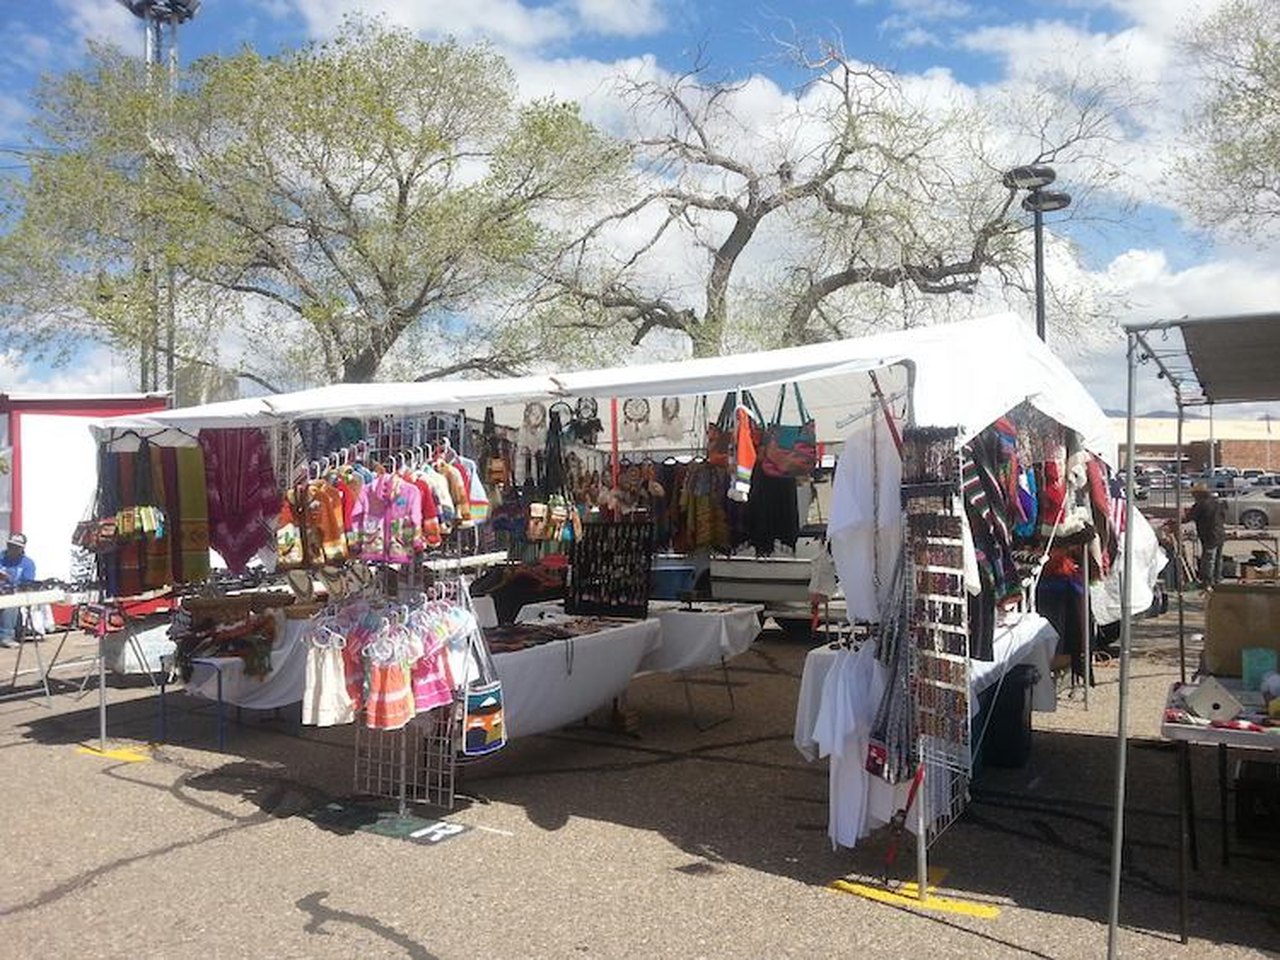 Expo New Mexico in Albuquerque Is The Best Flea Market In NM